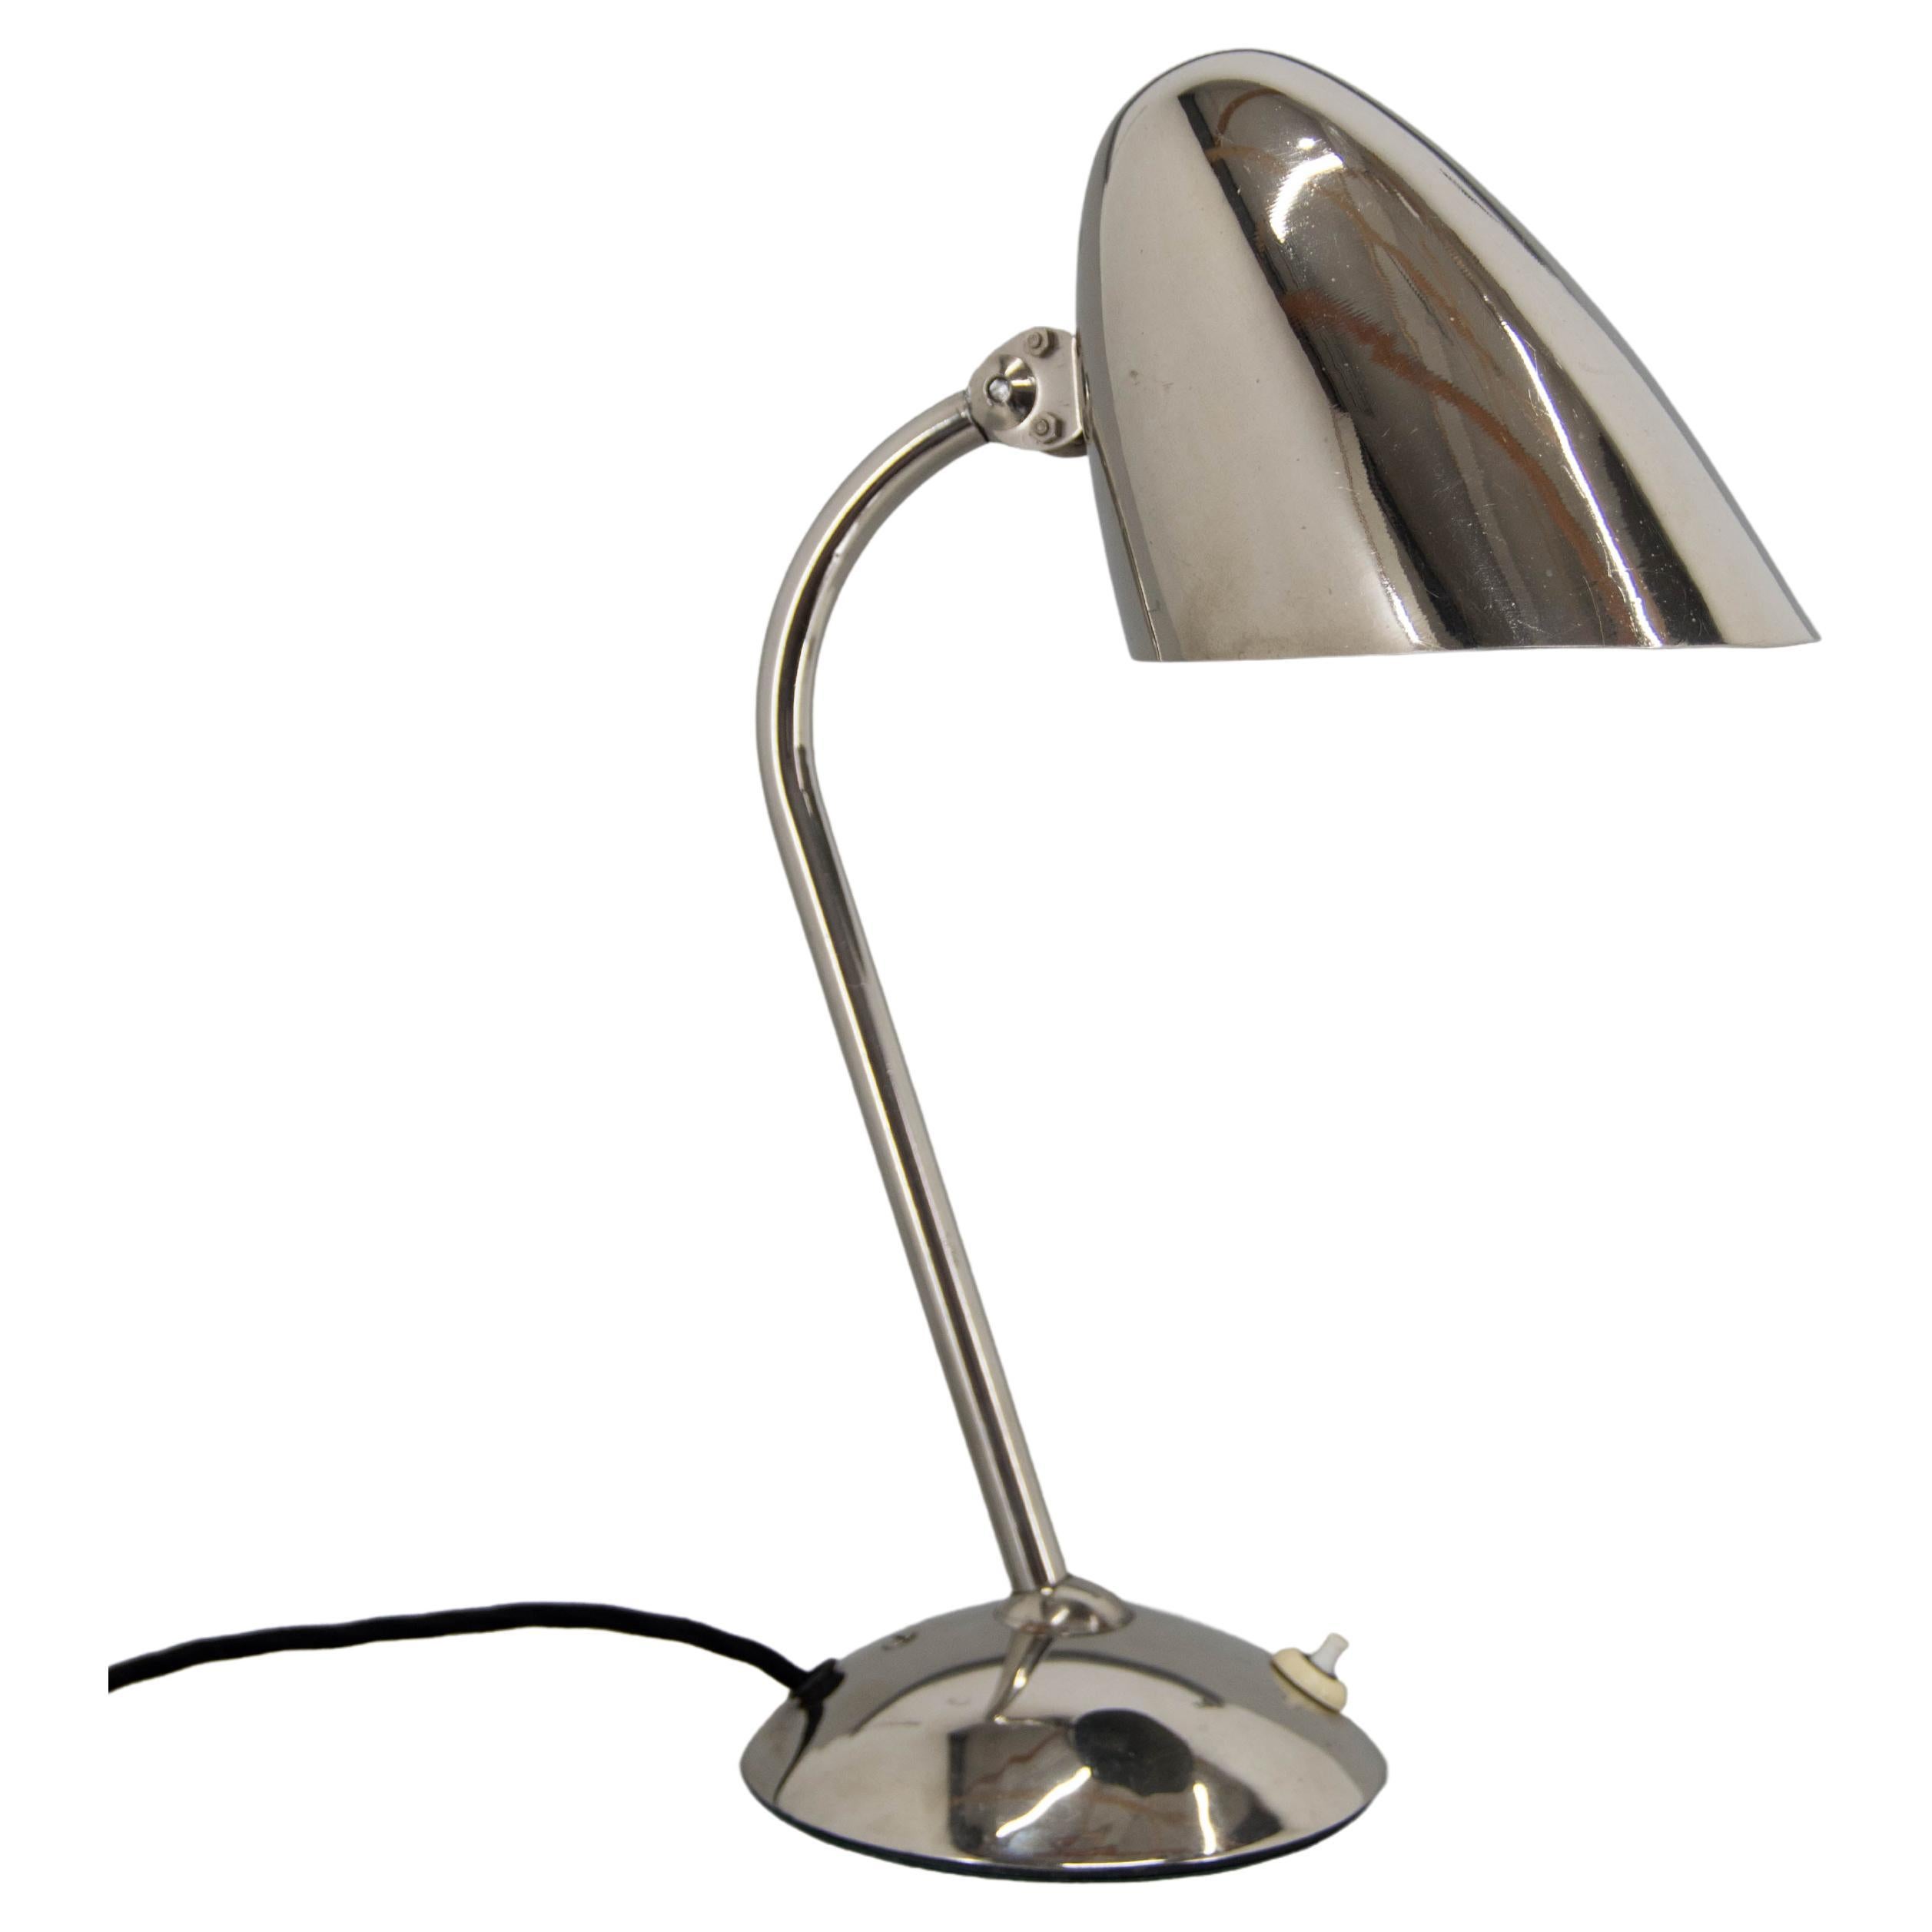 Functionalist / Bauhaus Flexible Table Lamp by Franta Anyz, 1930s For Sale